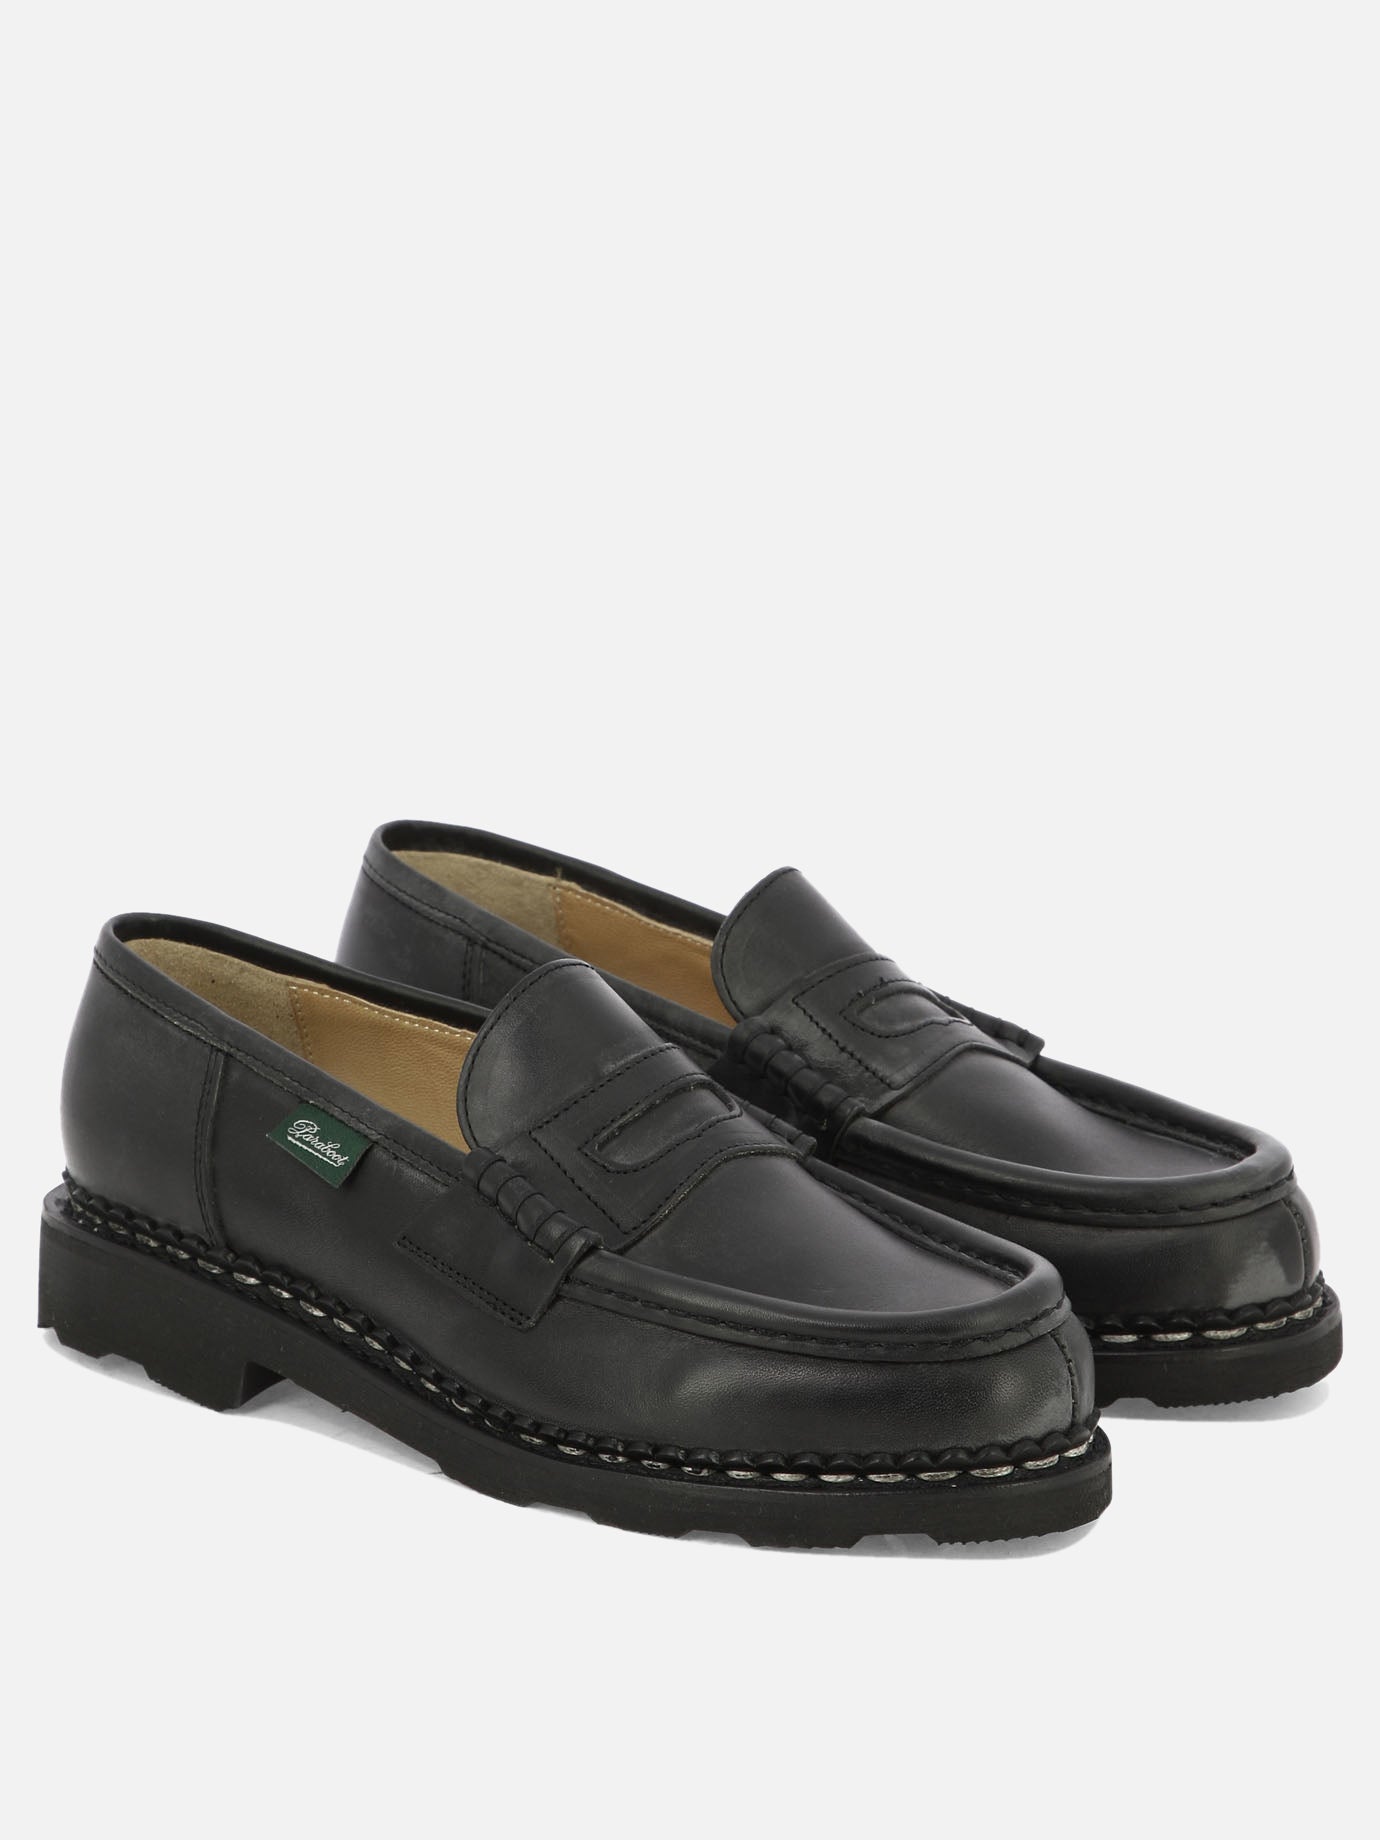 "Orsay Griff II" loafers